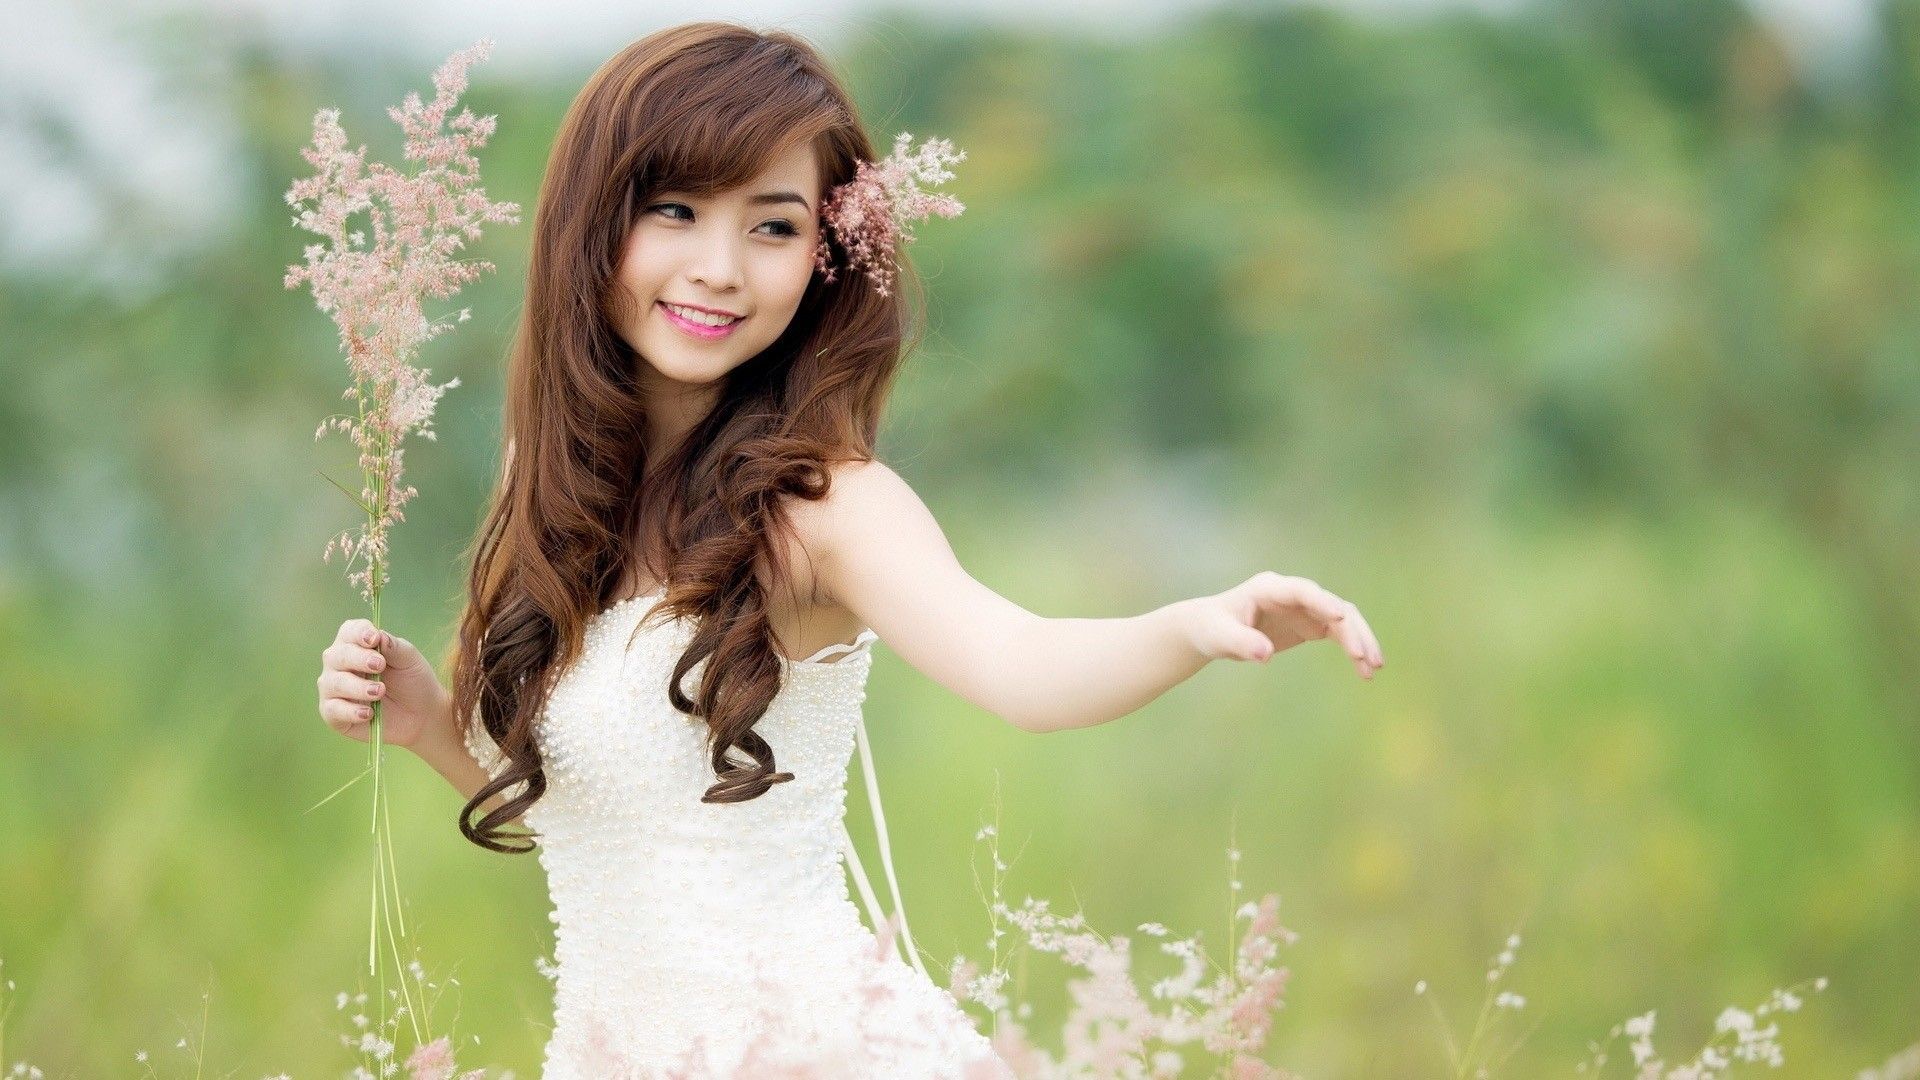 Asian girl with flowers uhd wallpapers - Ultra High Definition